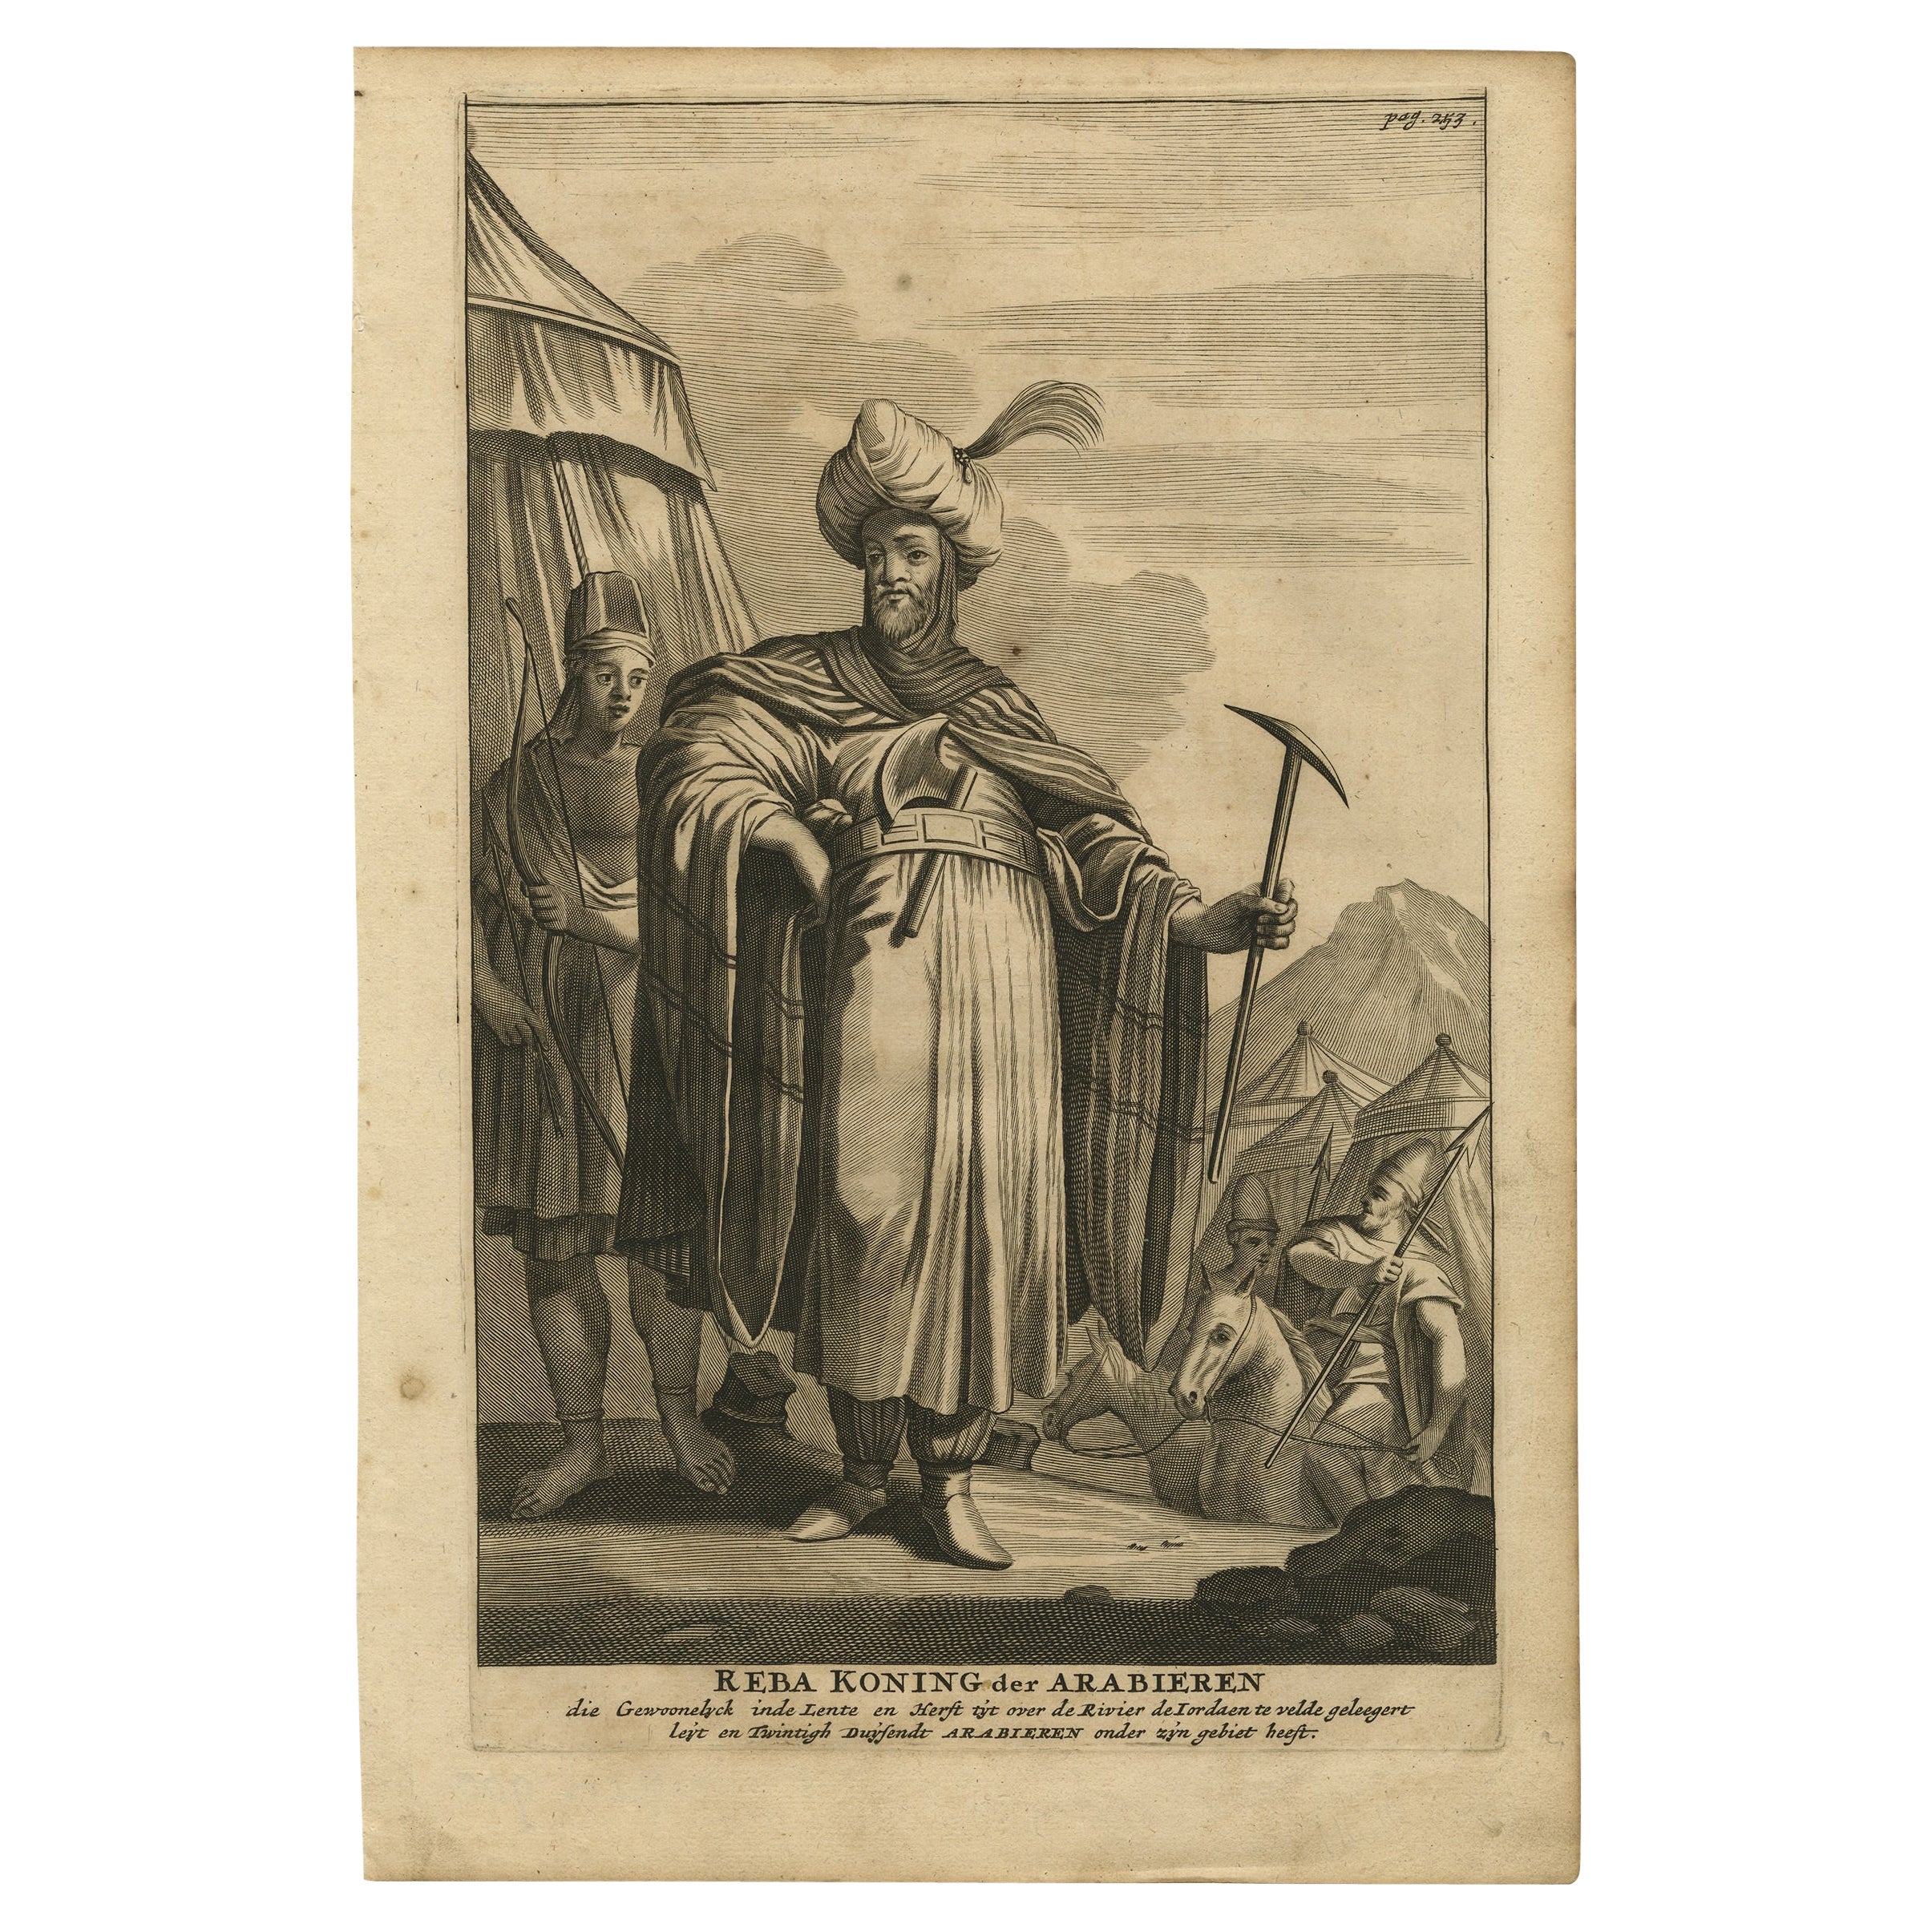 Antique Print of Reba, The King of The Arab People, 1677